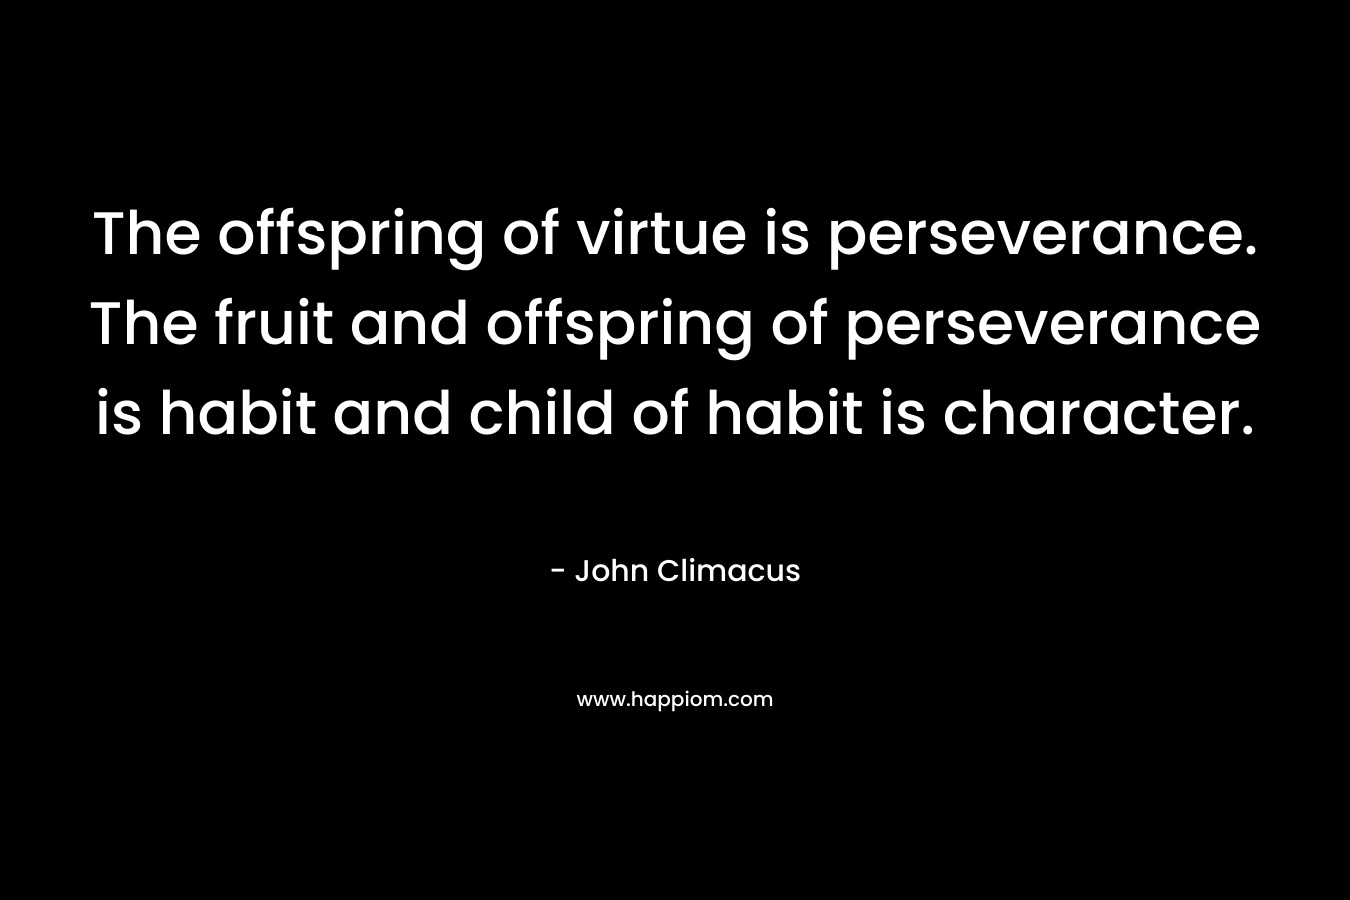 The offspring of virtue is perseverance. The fruit and offspring of perseverance is habit and child of habit is character. – John Climacus